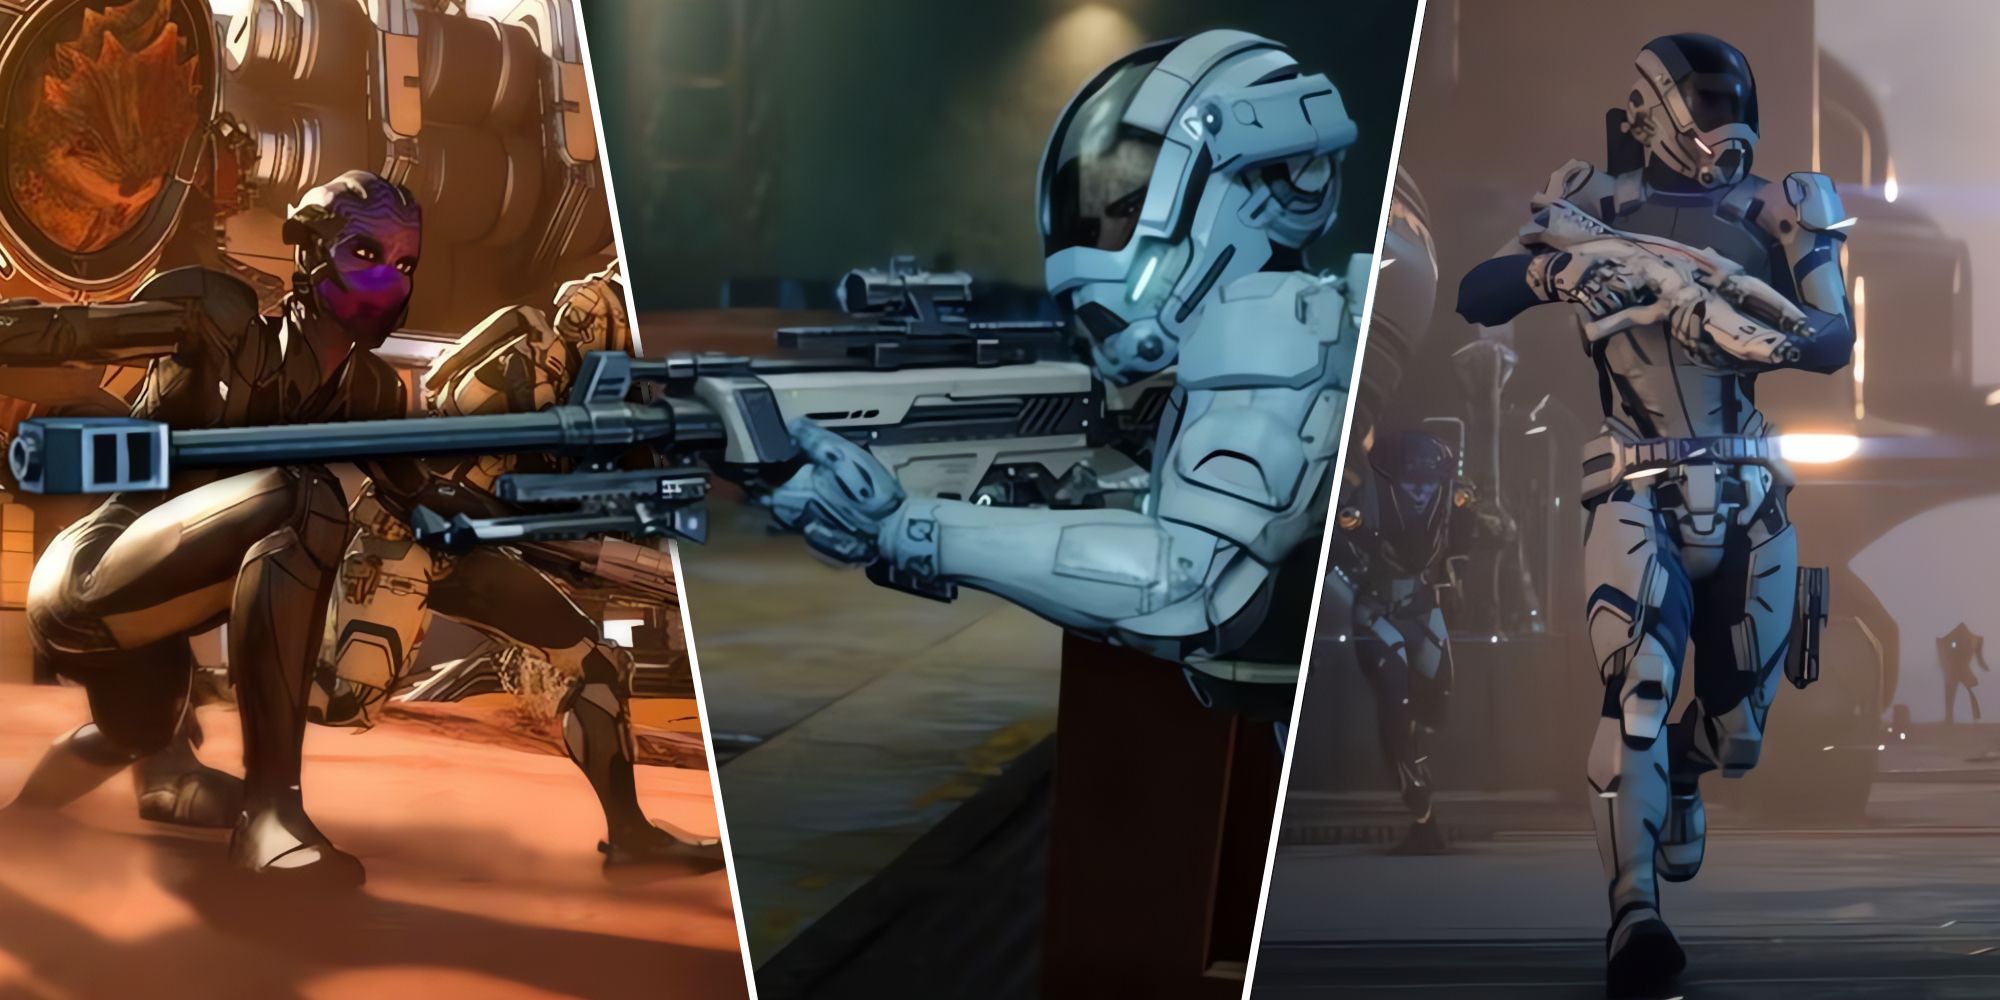 Split image of an Asari, Ryder with a sniper rifle, and rider running